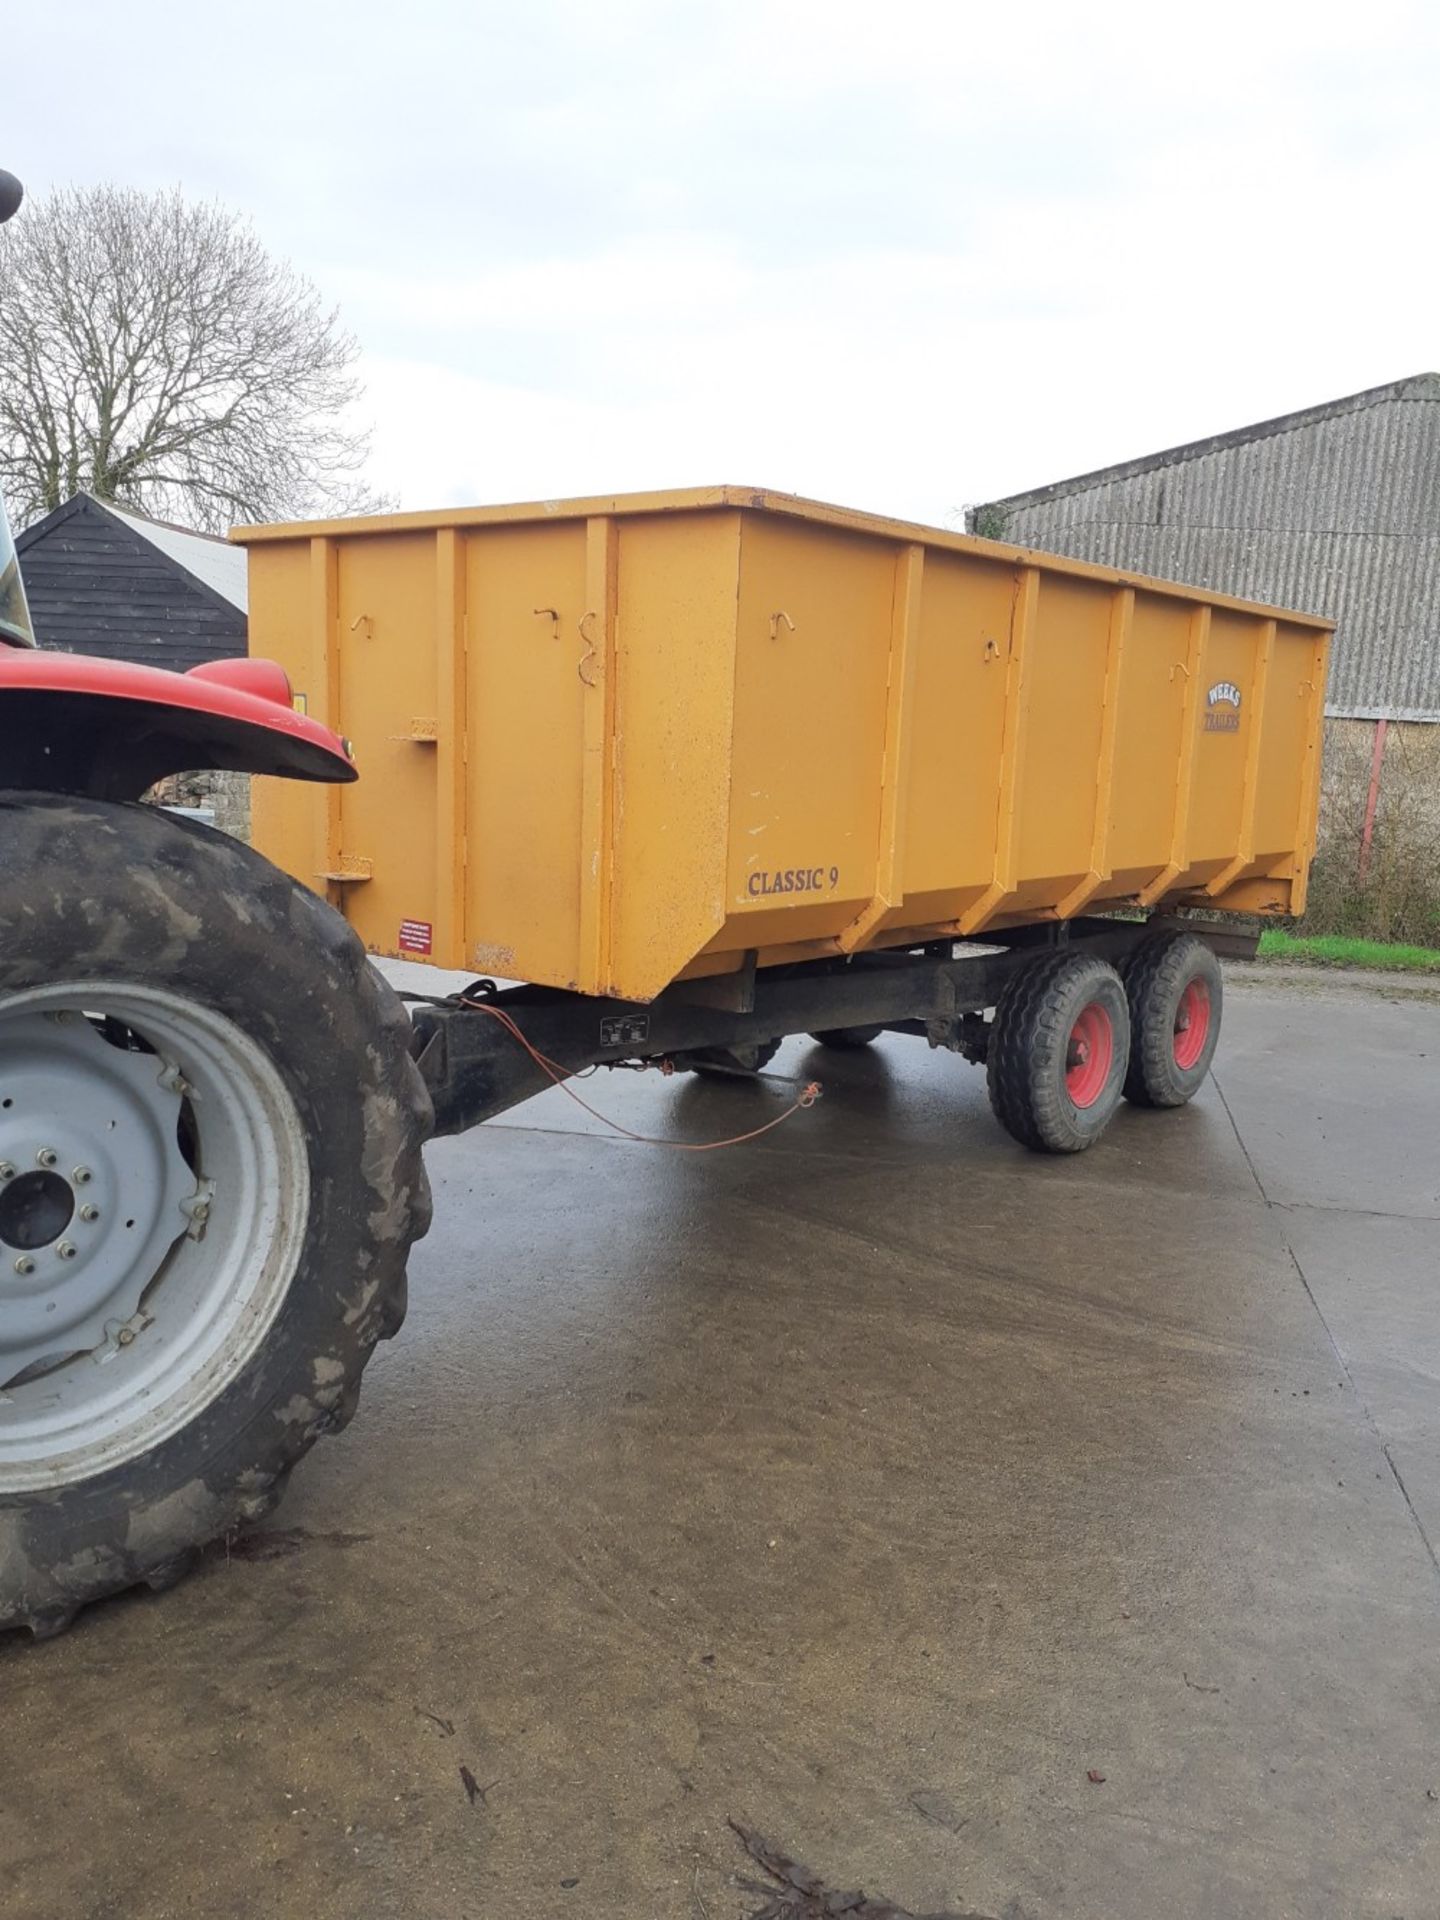 Weekes 9 tonne classic trailer, on our farm since new, - Image 2 of 5